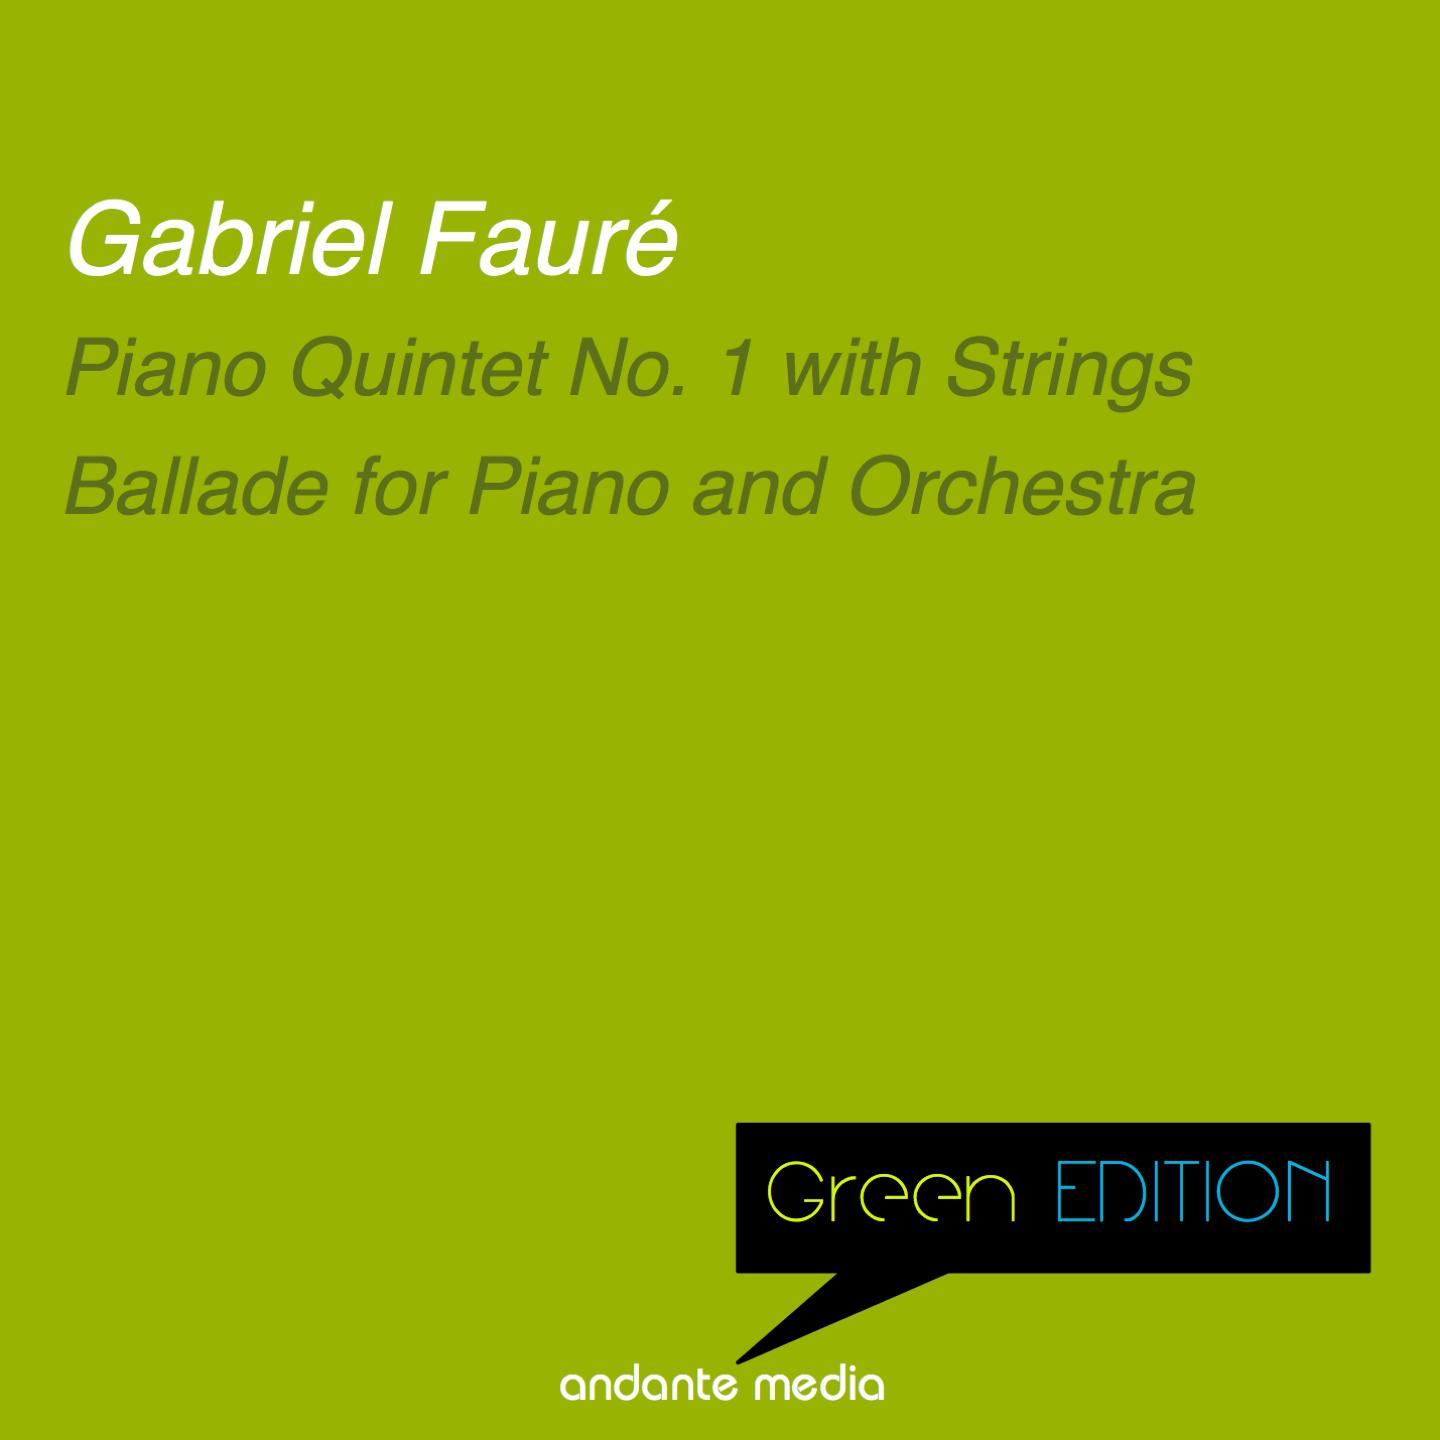 Ballade for Piano and Orchestra in F-Sharp Major, Op. 19